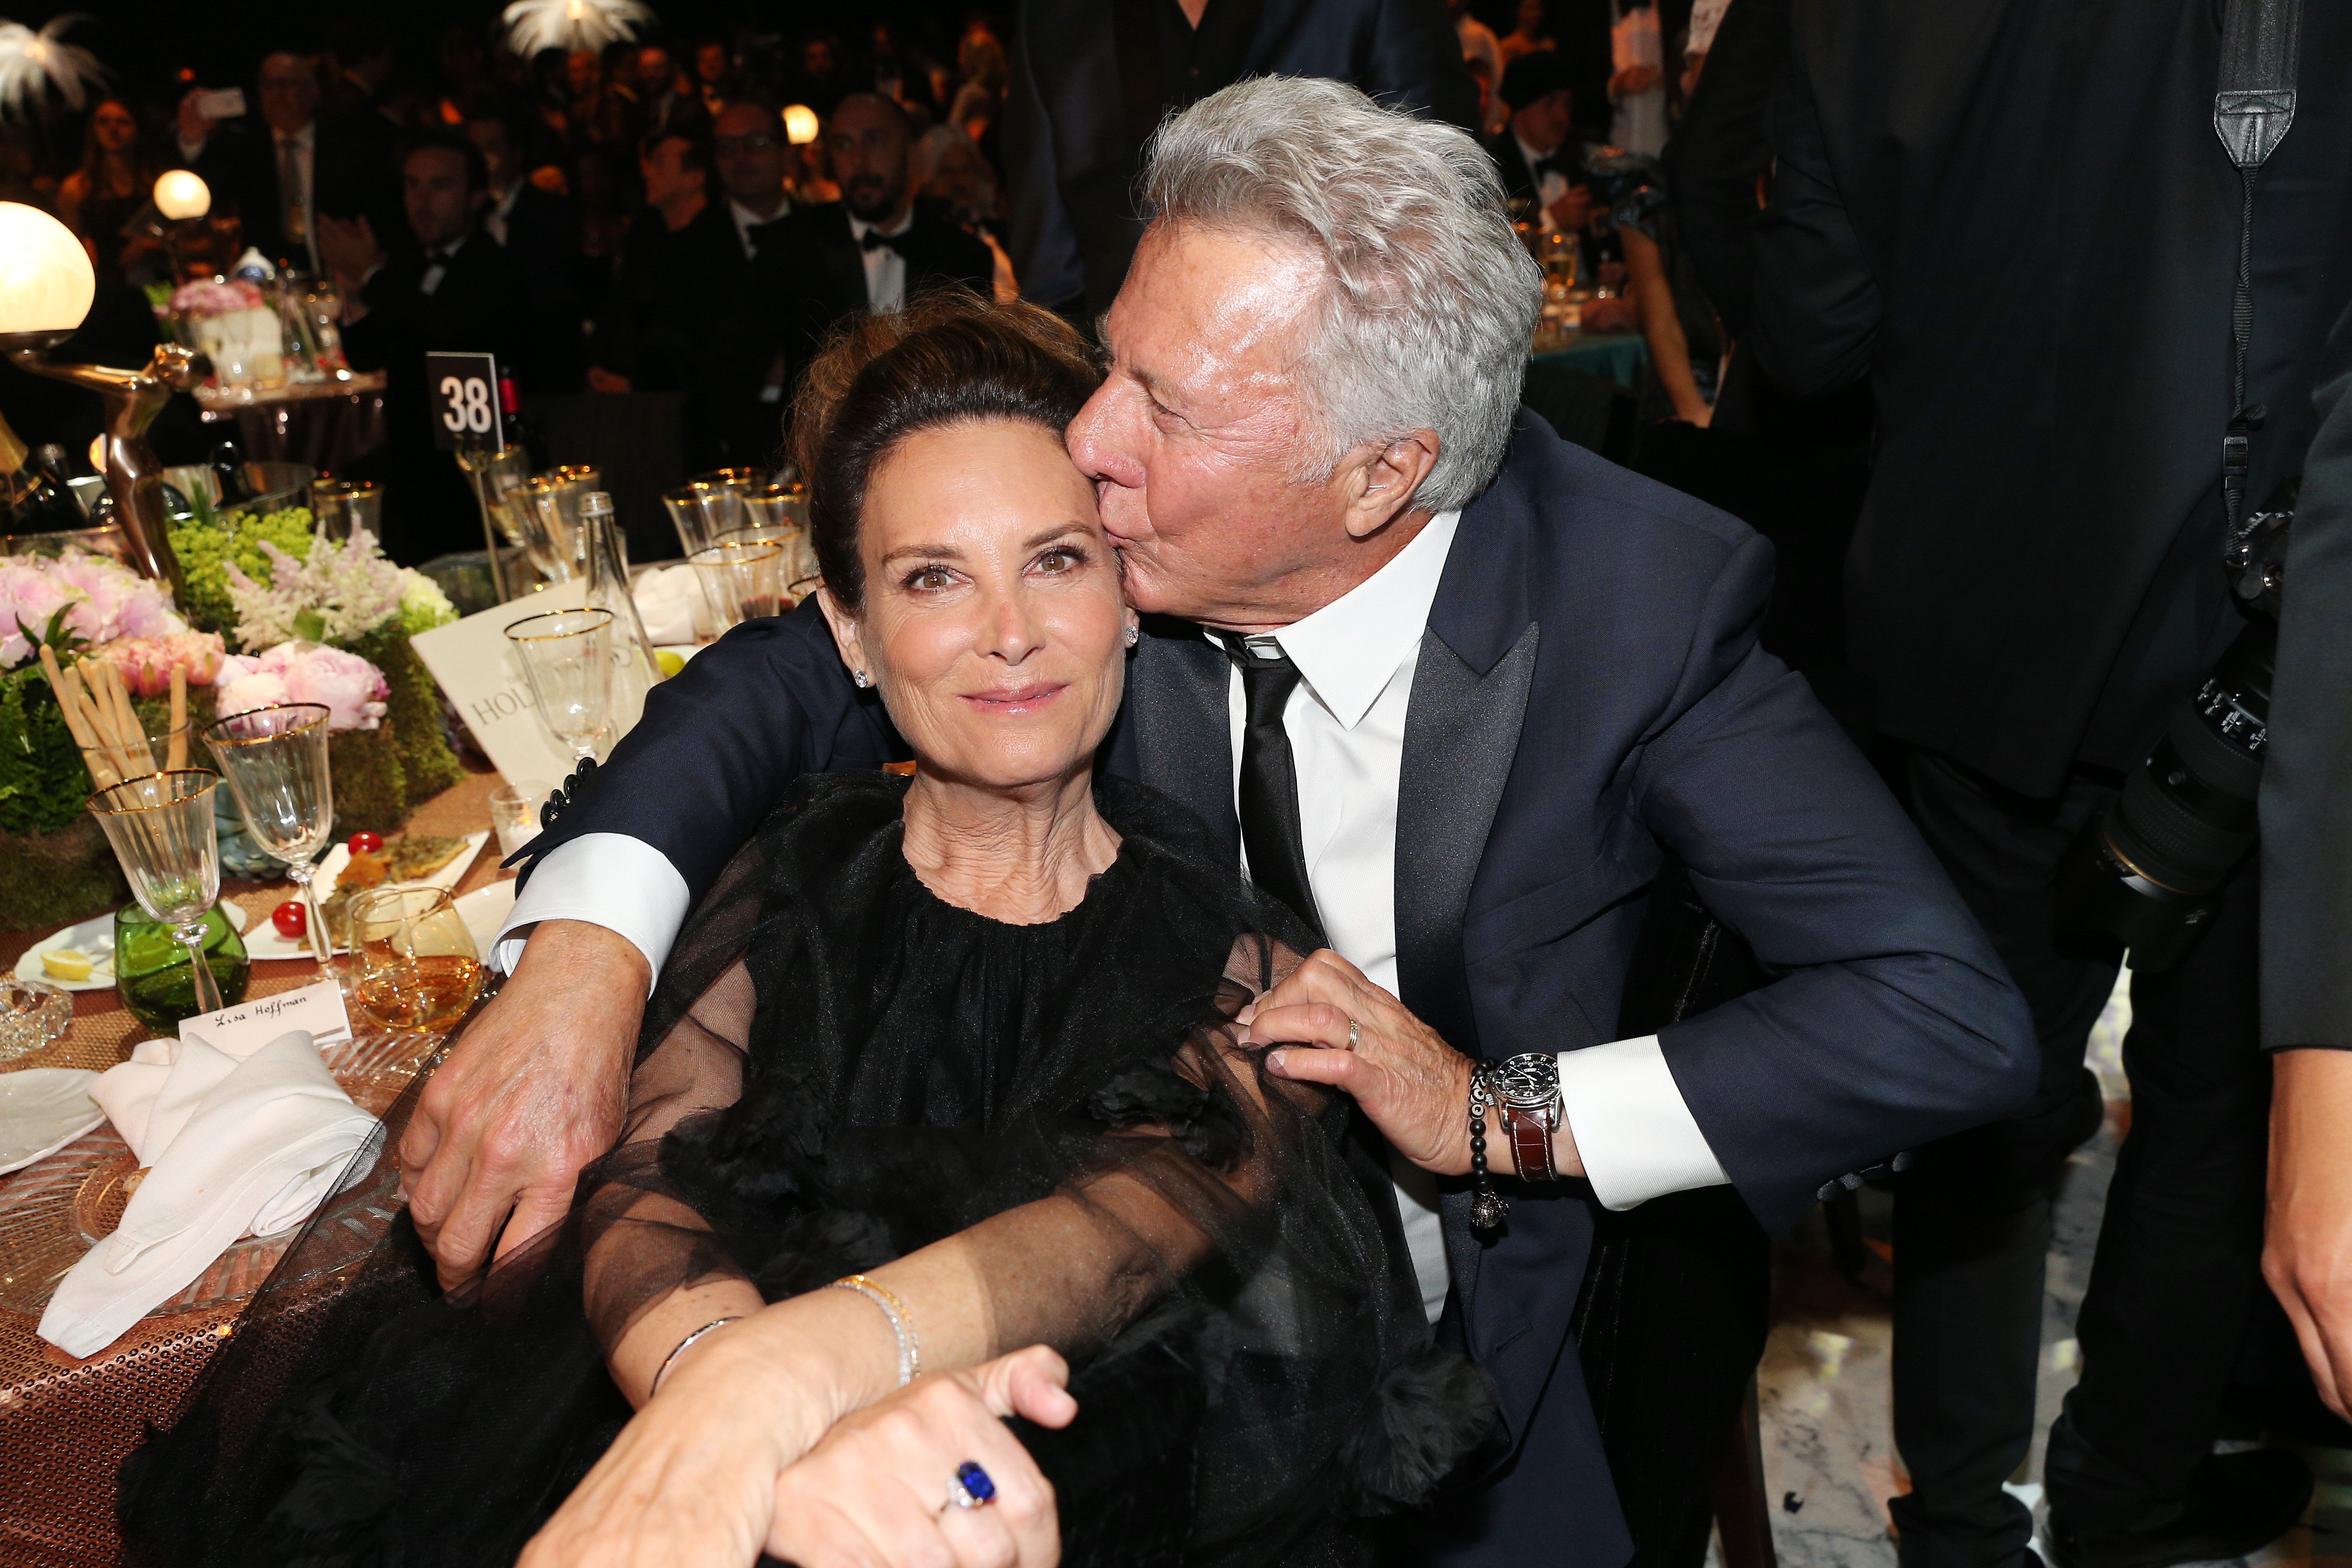  Lisa Hoffman and Dustin Hoffman attend the amfAR Gala Cannes 2017 at Hotel du Cap-Eden-Roc on May 25, 2017 in Cap d'Antibes, France. | Source: Getty Images 